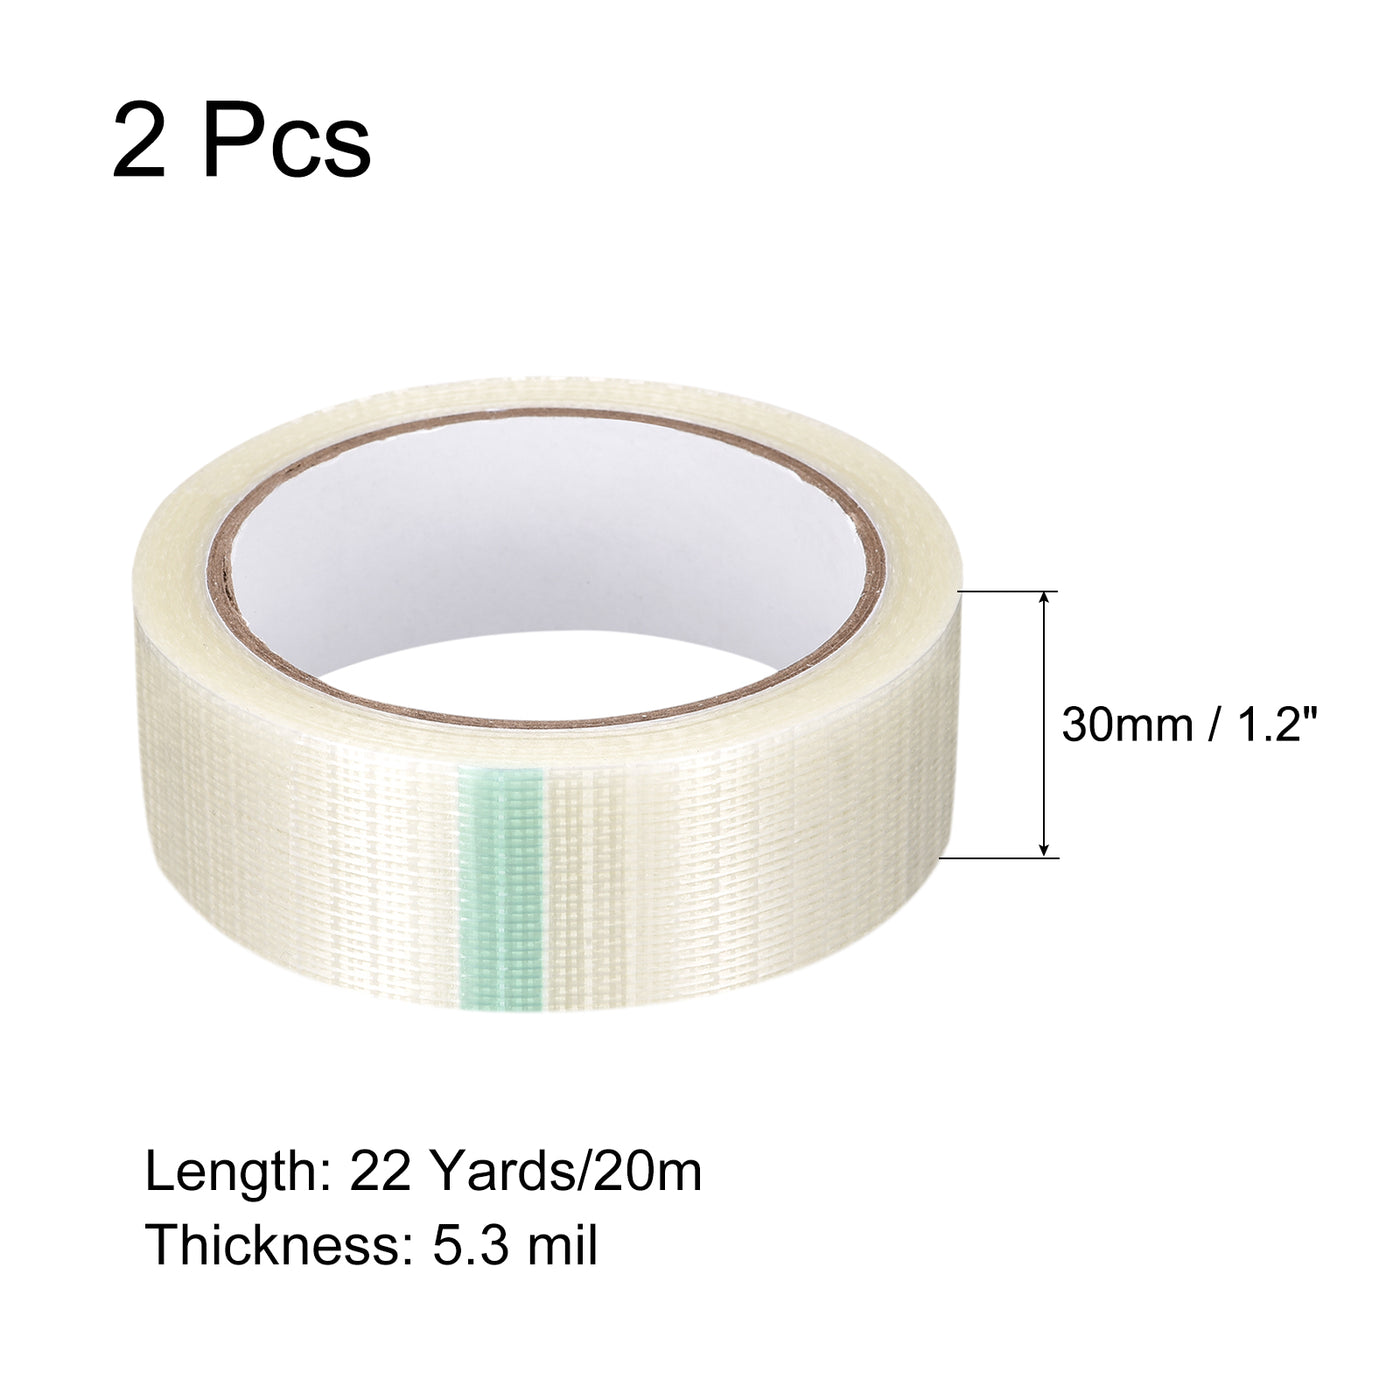 Harfington 1.2 Inch x 22 Yards 5.3 Mil Reinforced Fiberglass Packing Tape, Pack of 2